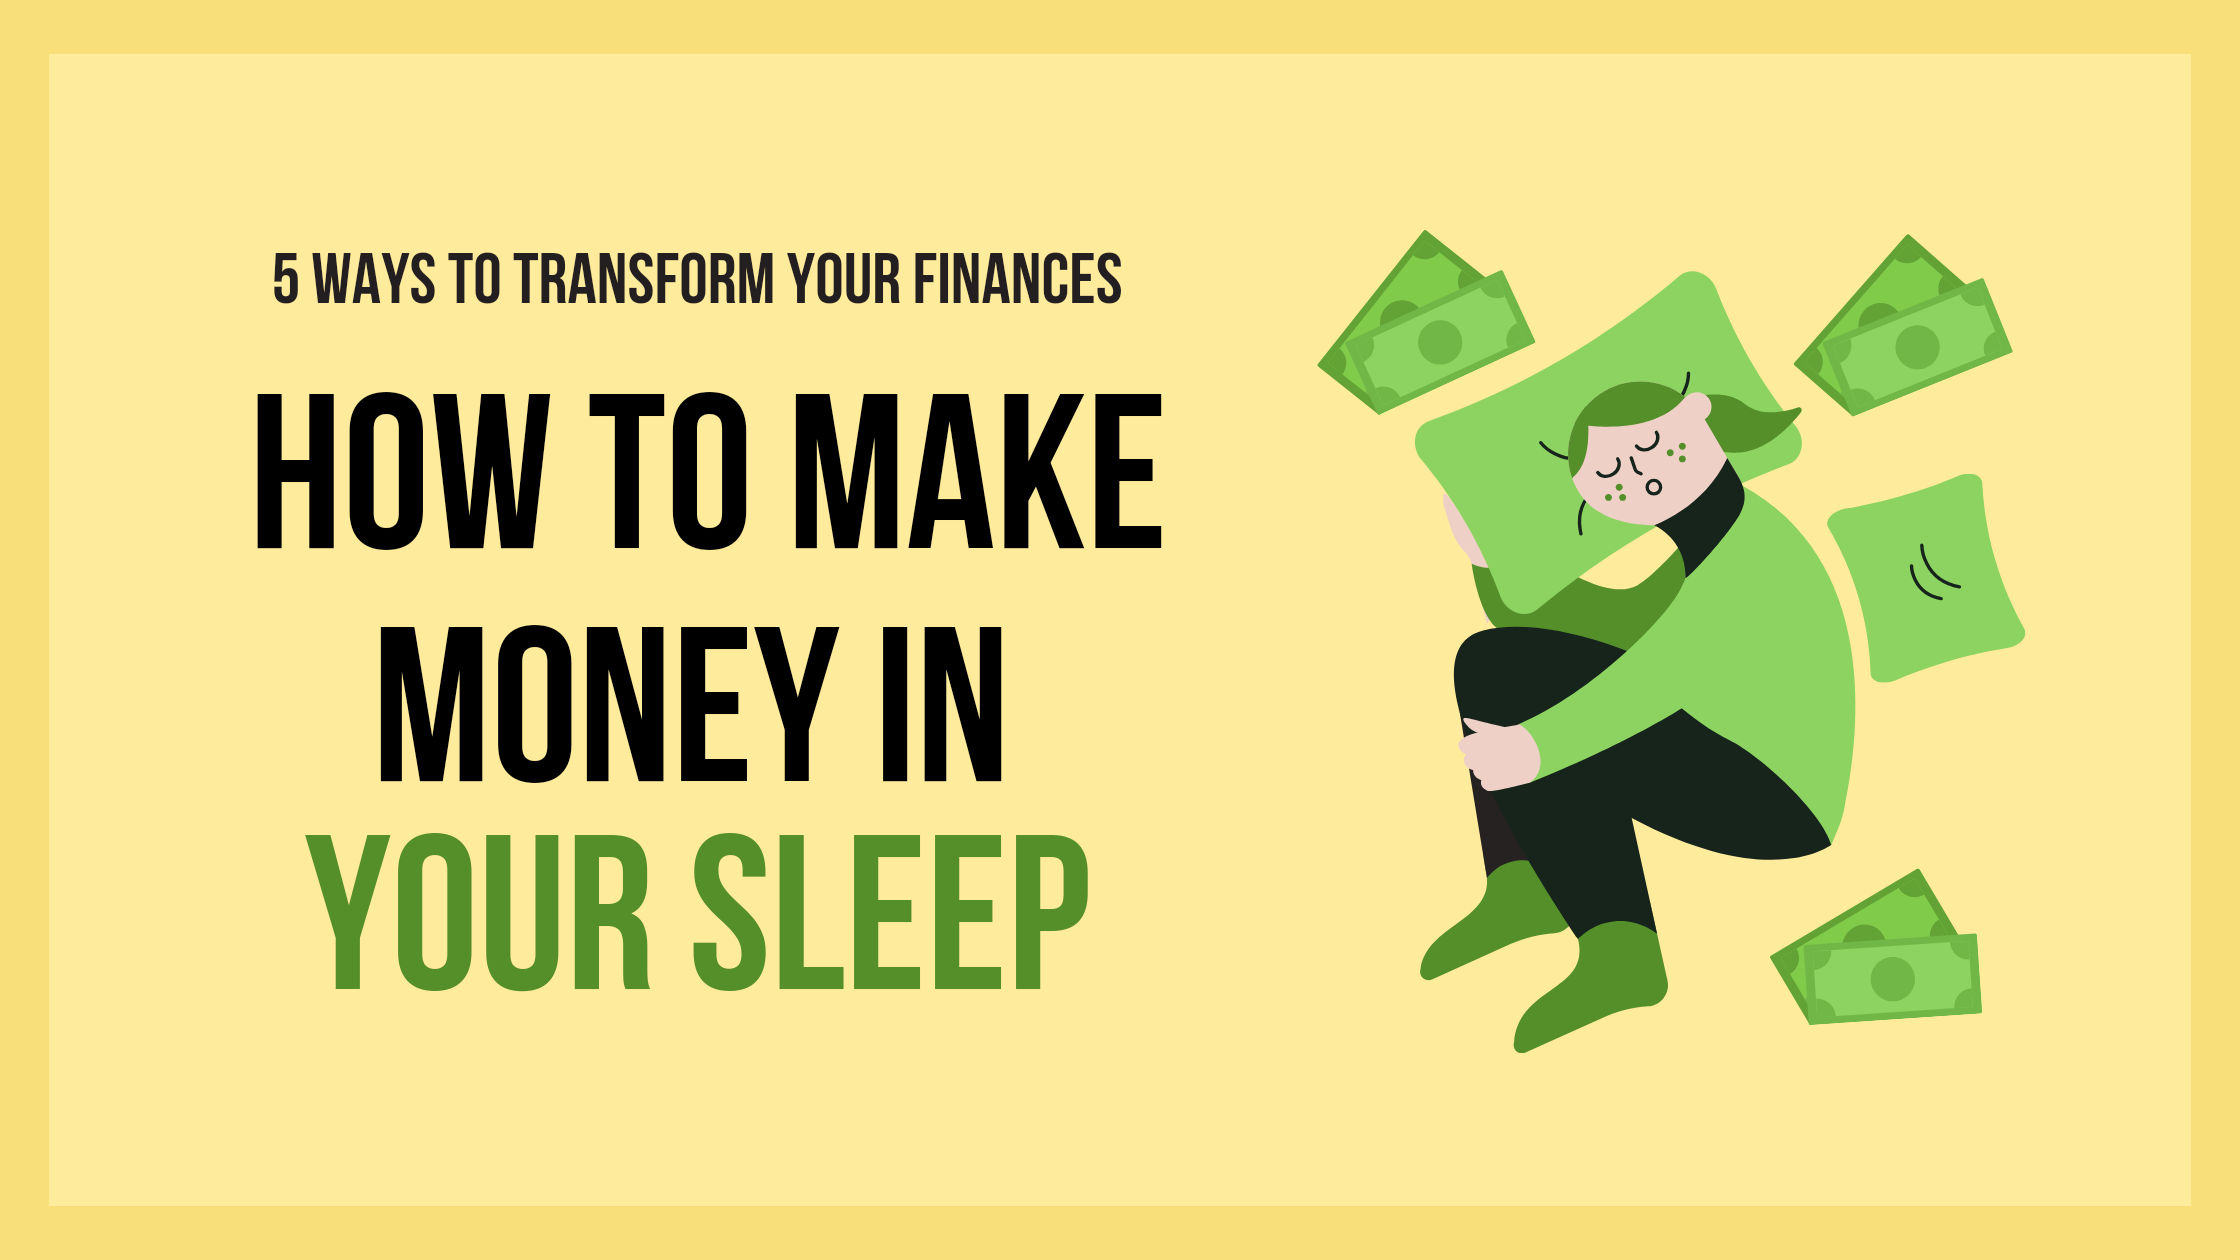 Any thoughts? What are some ways to make money while you sleep?